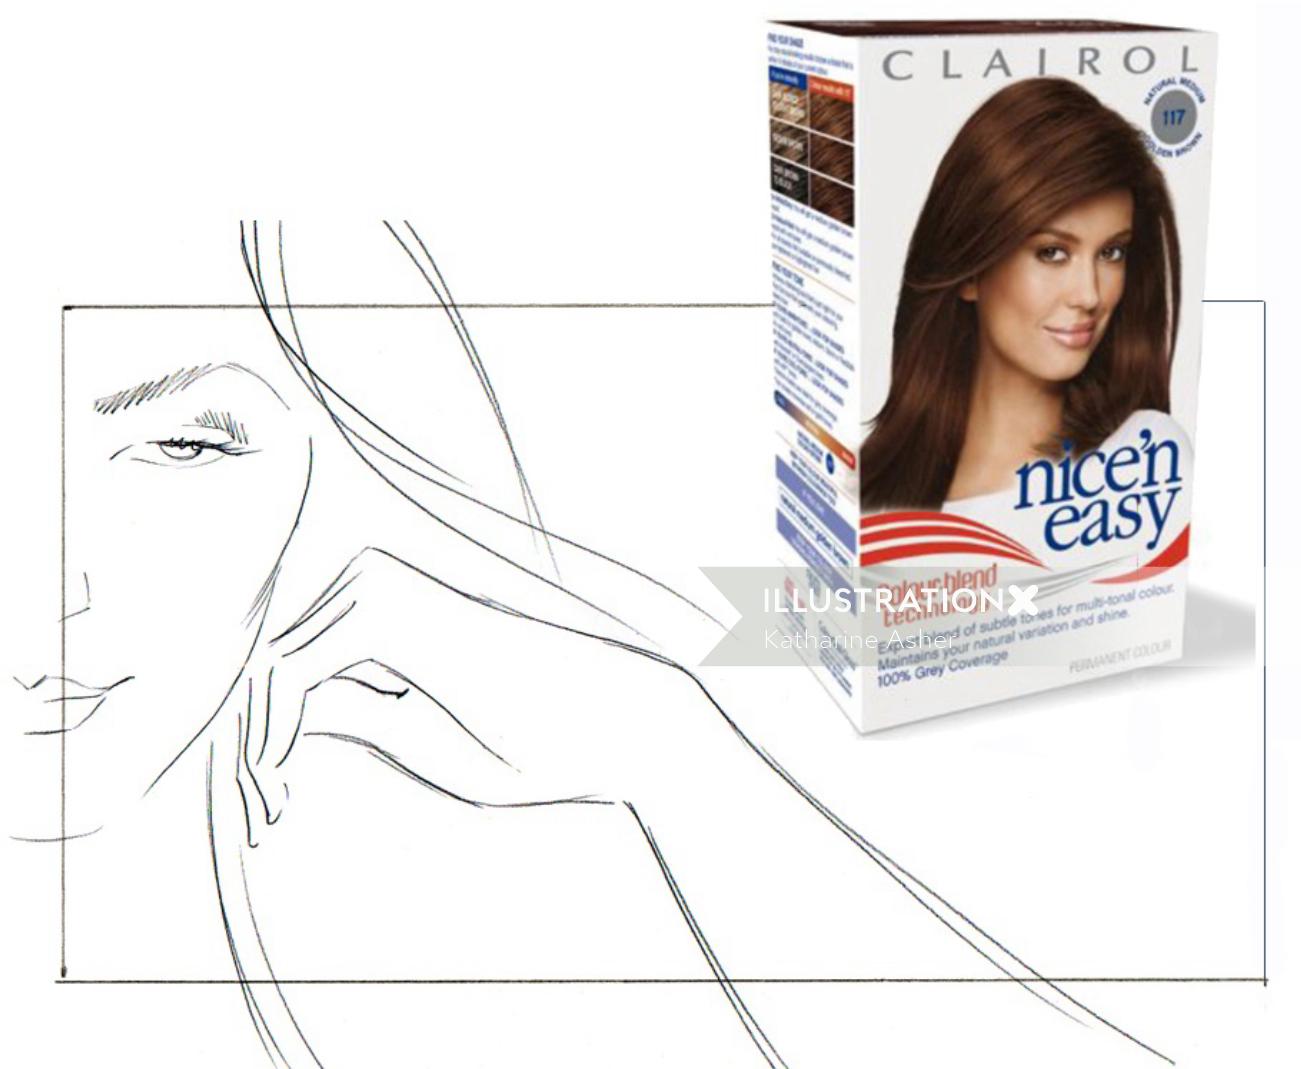 Storyboard for Clairol Hair care